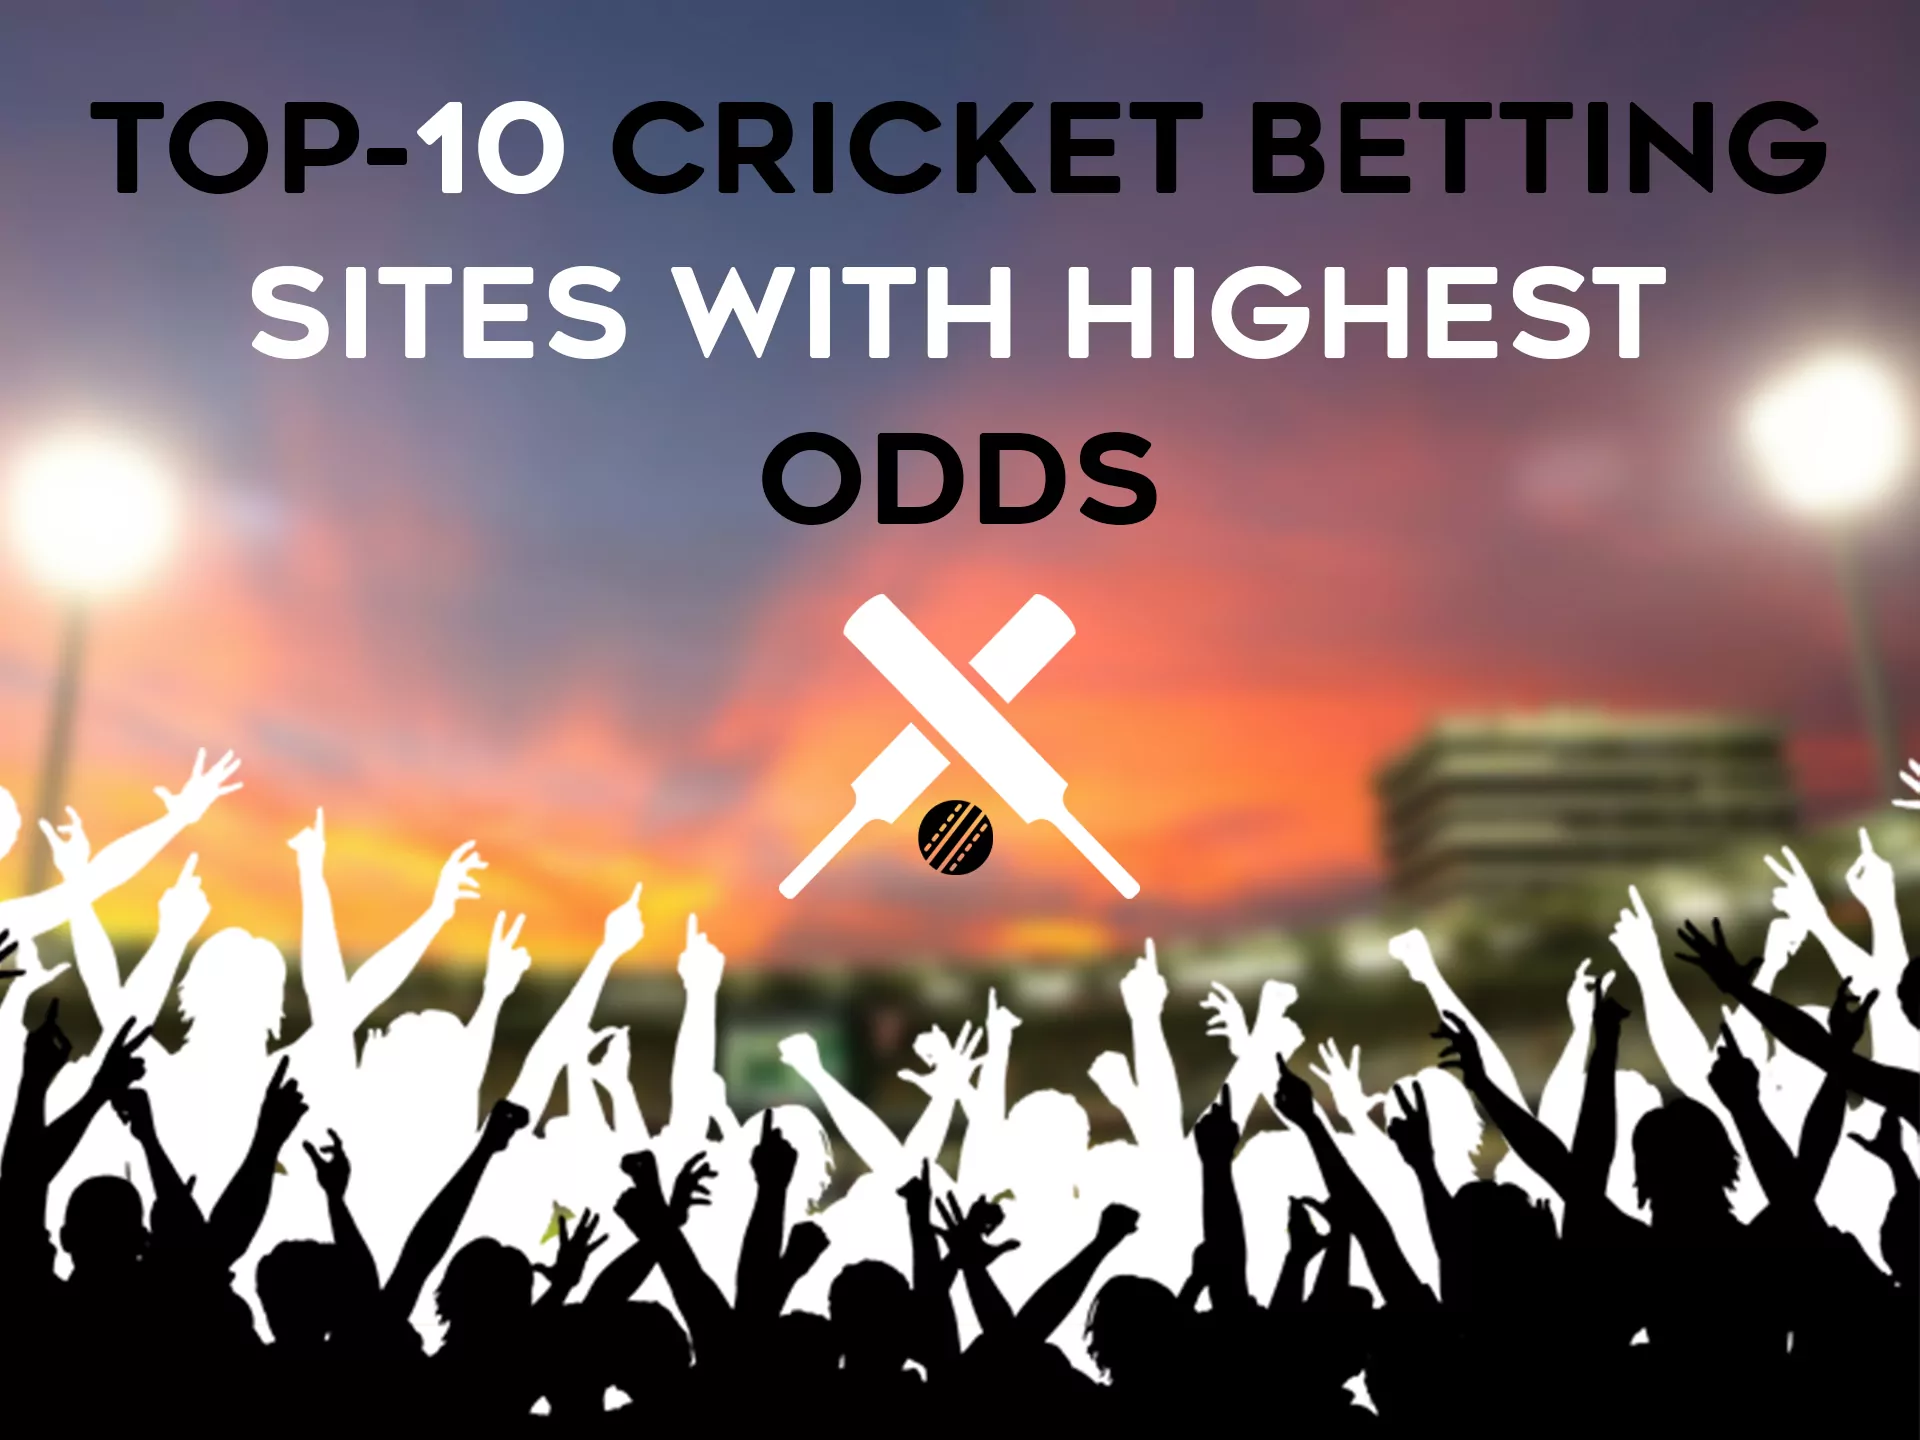 Check the list of top 10 cricket betting sites with the highest odds in Bangaldesh.